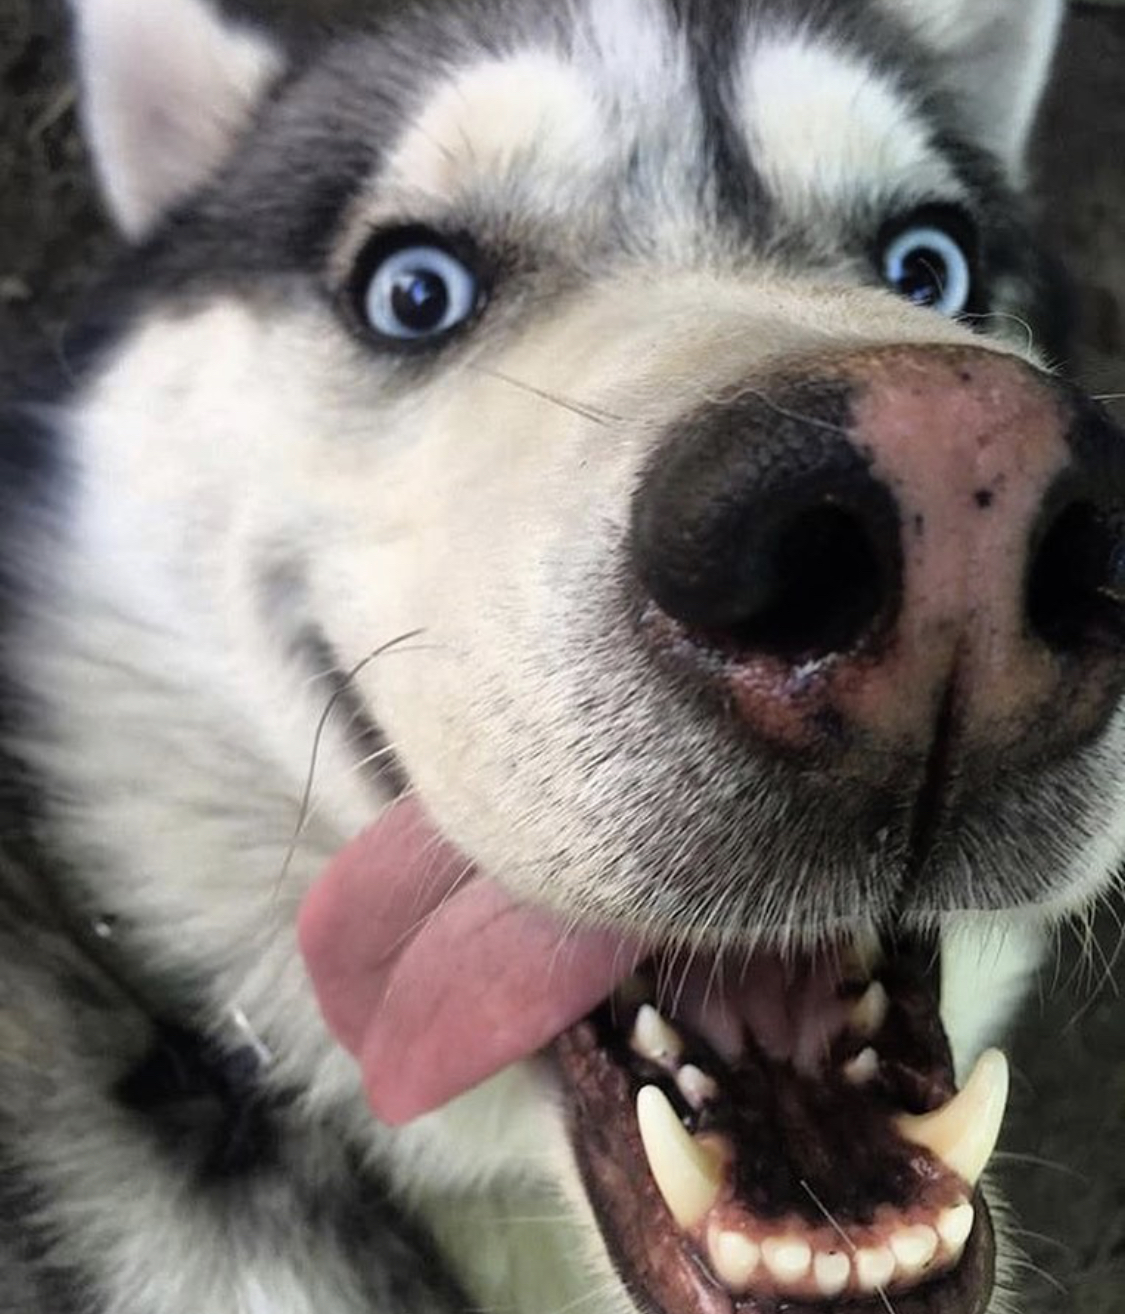 A Husky smiling with its tongue sticking out on the side of its mouth